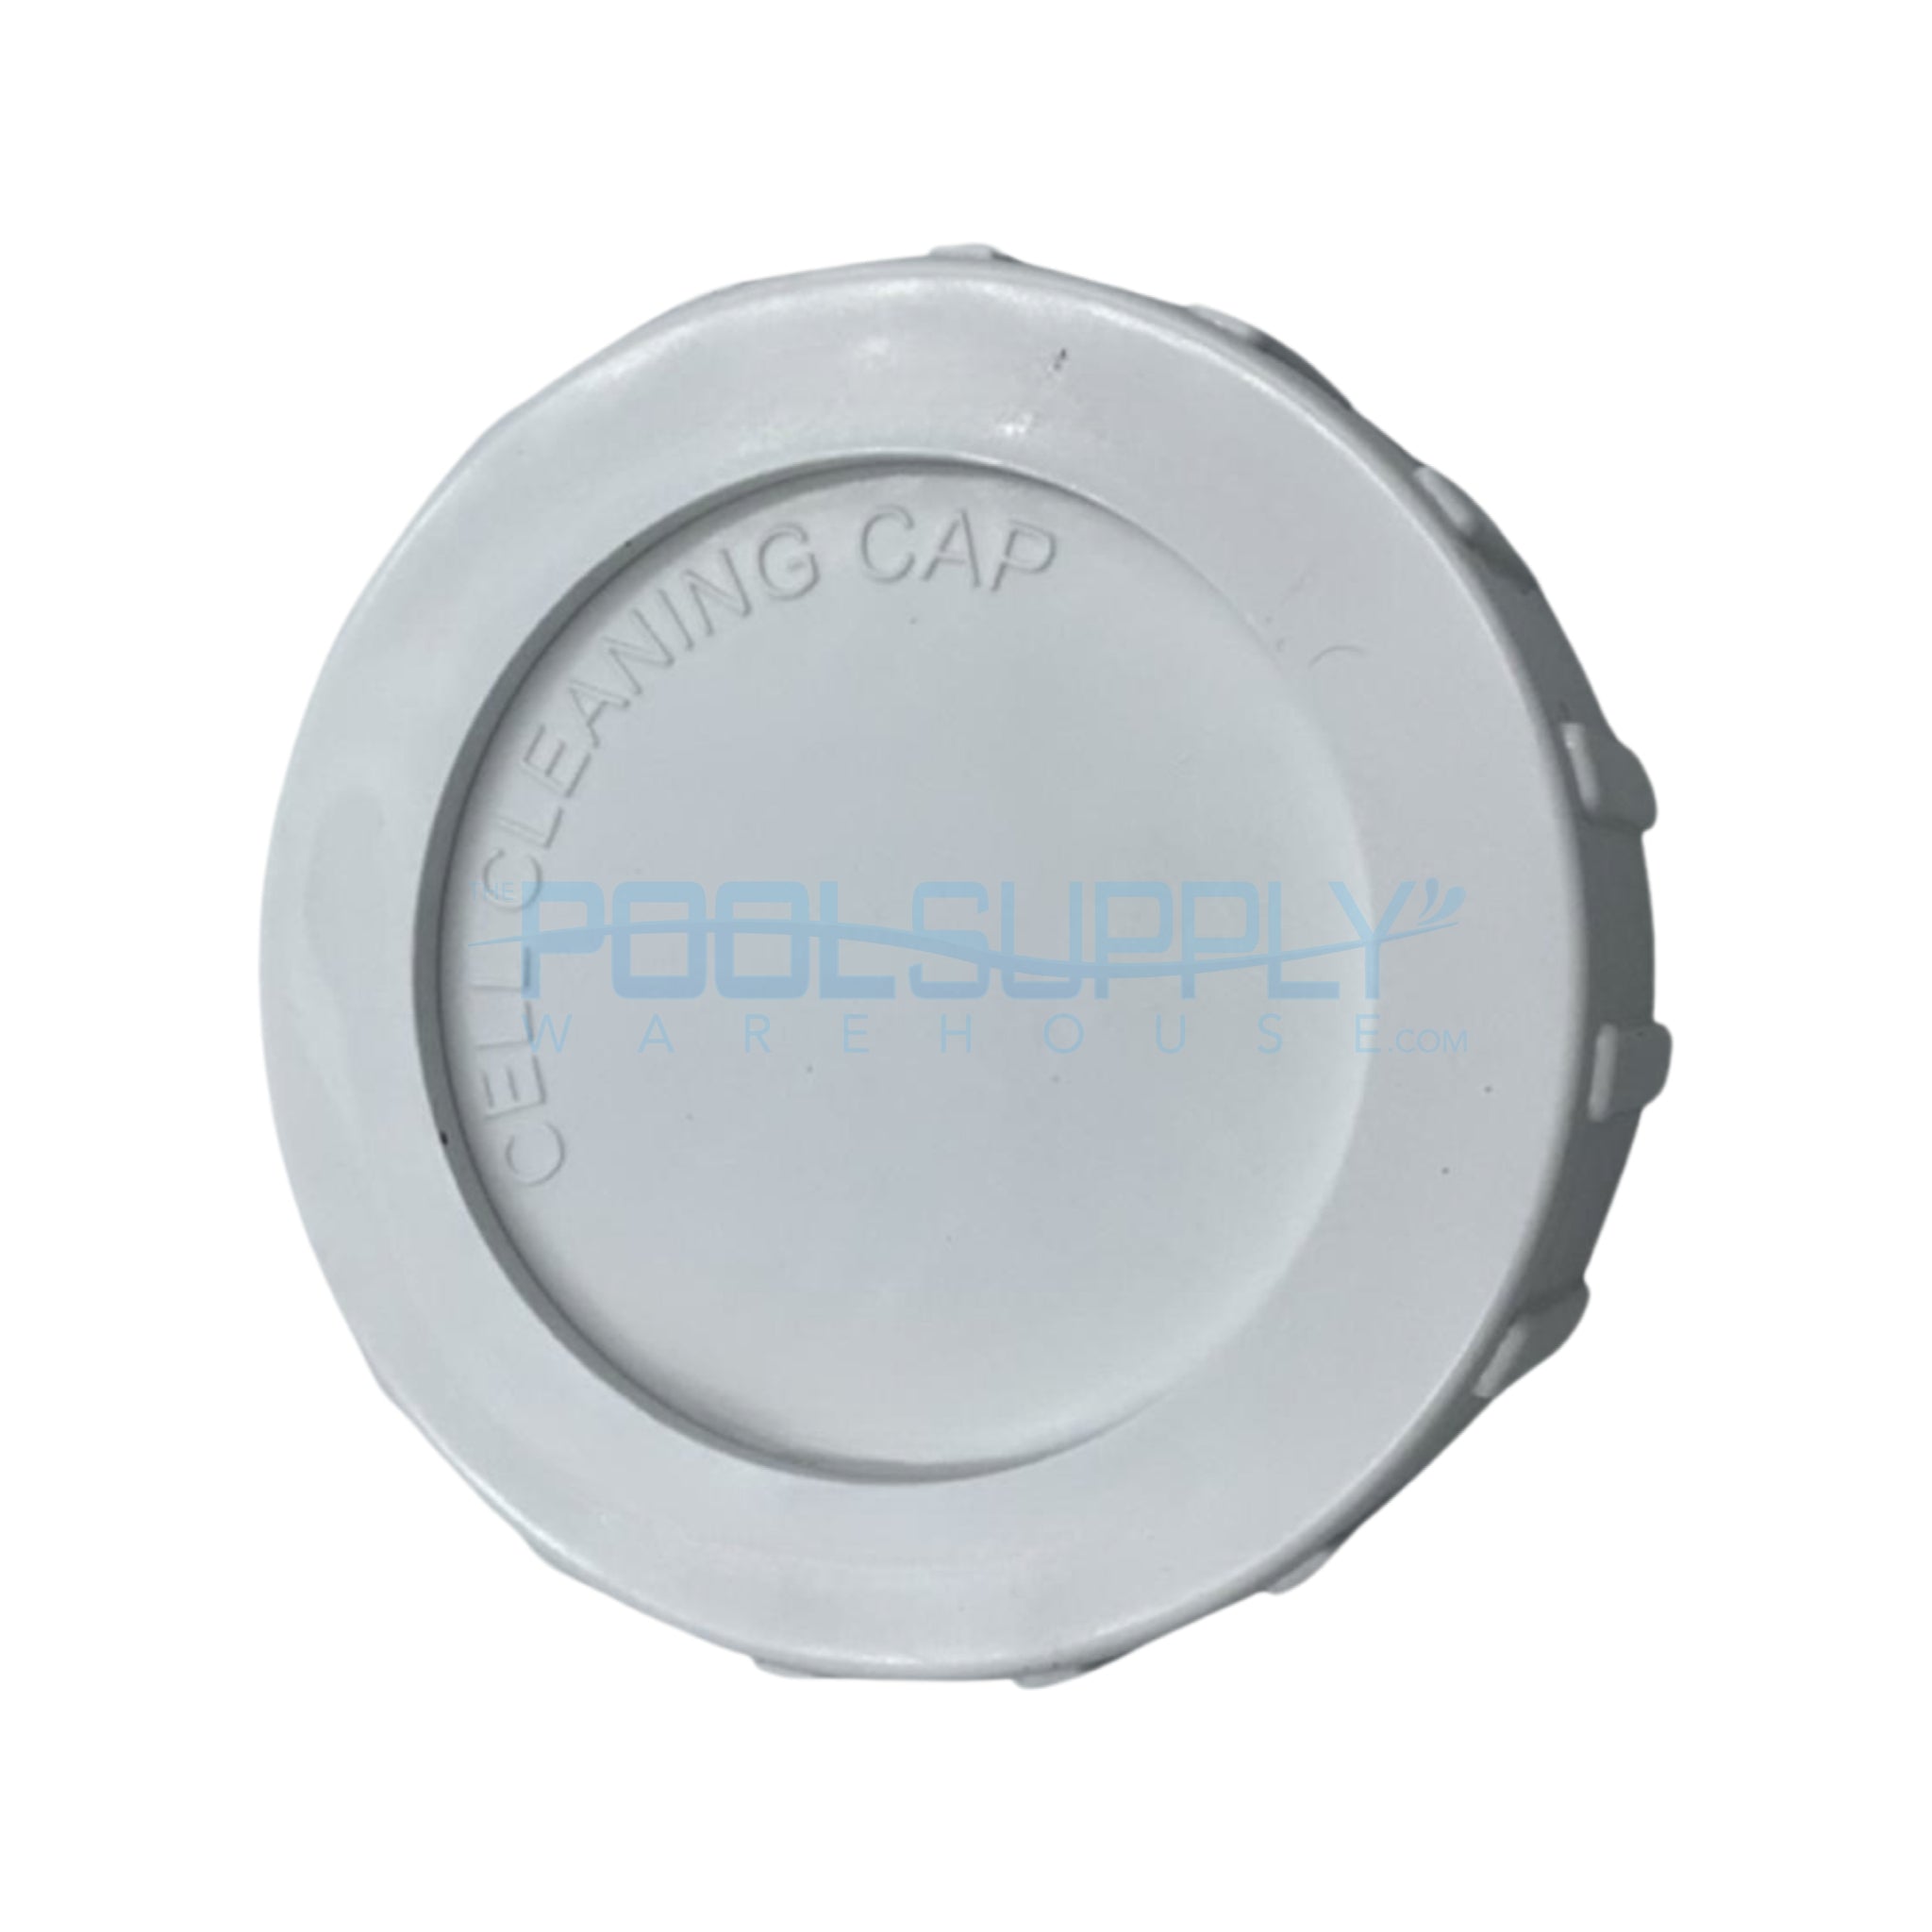 Solaxx / PureChlor Salt Cell Cleaning Cap - SBY00200